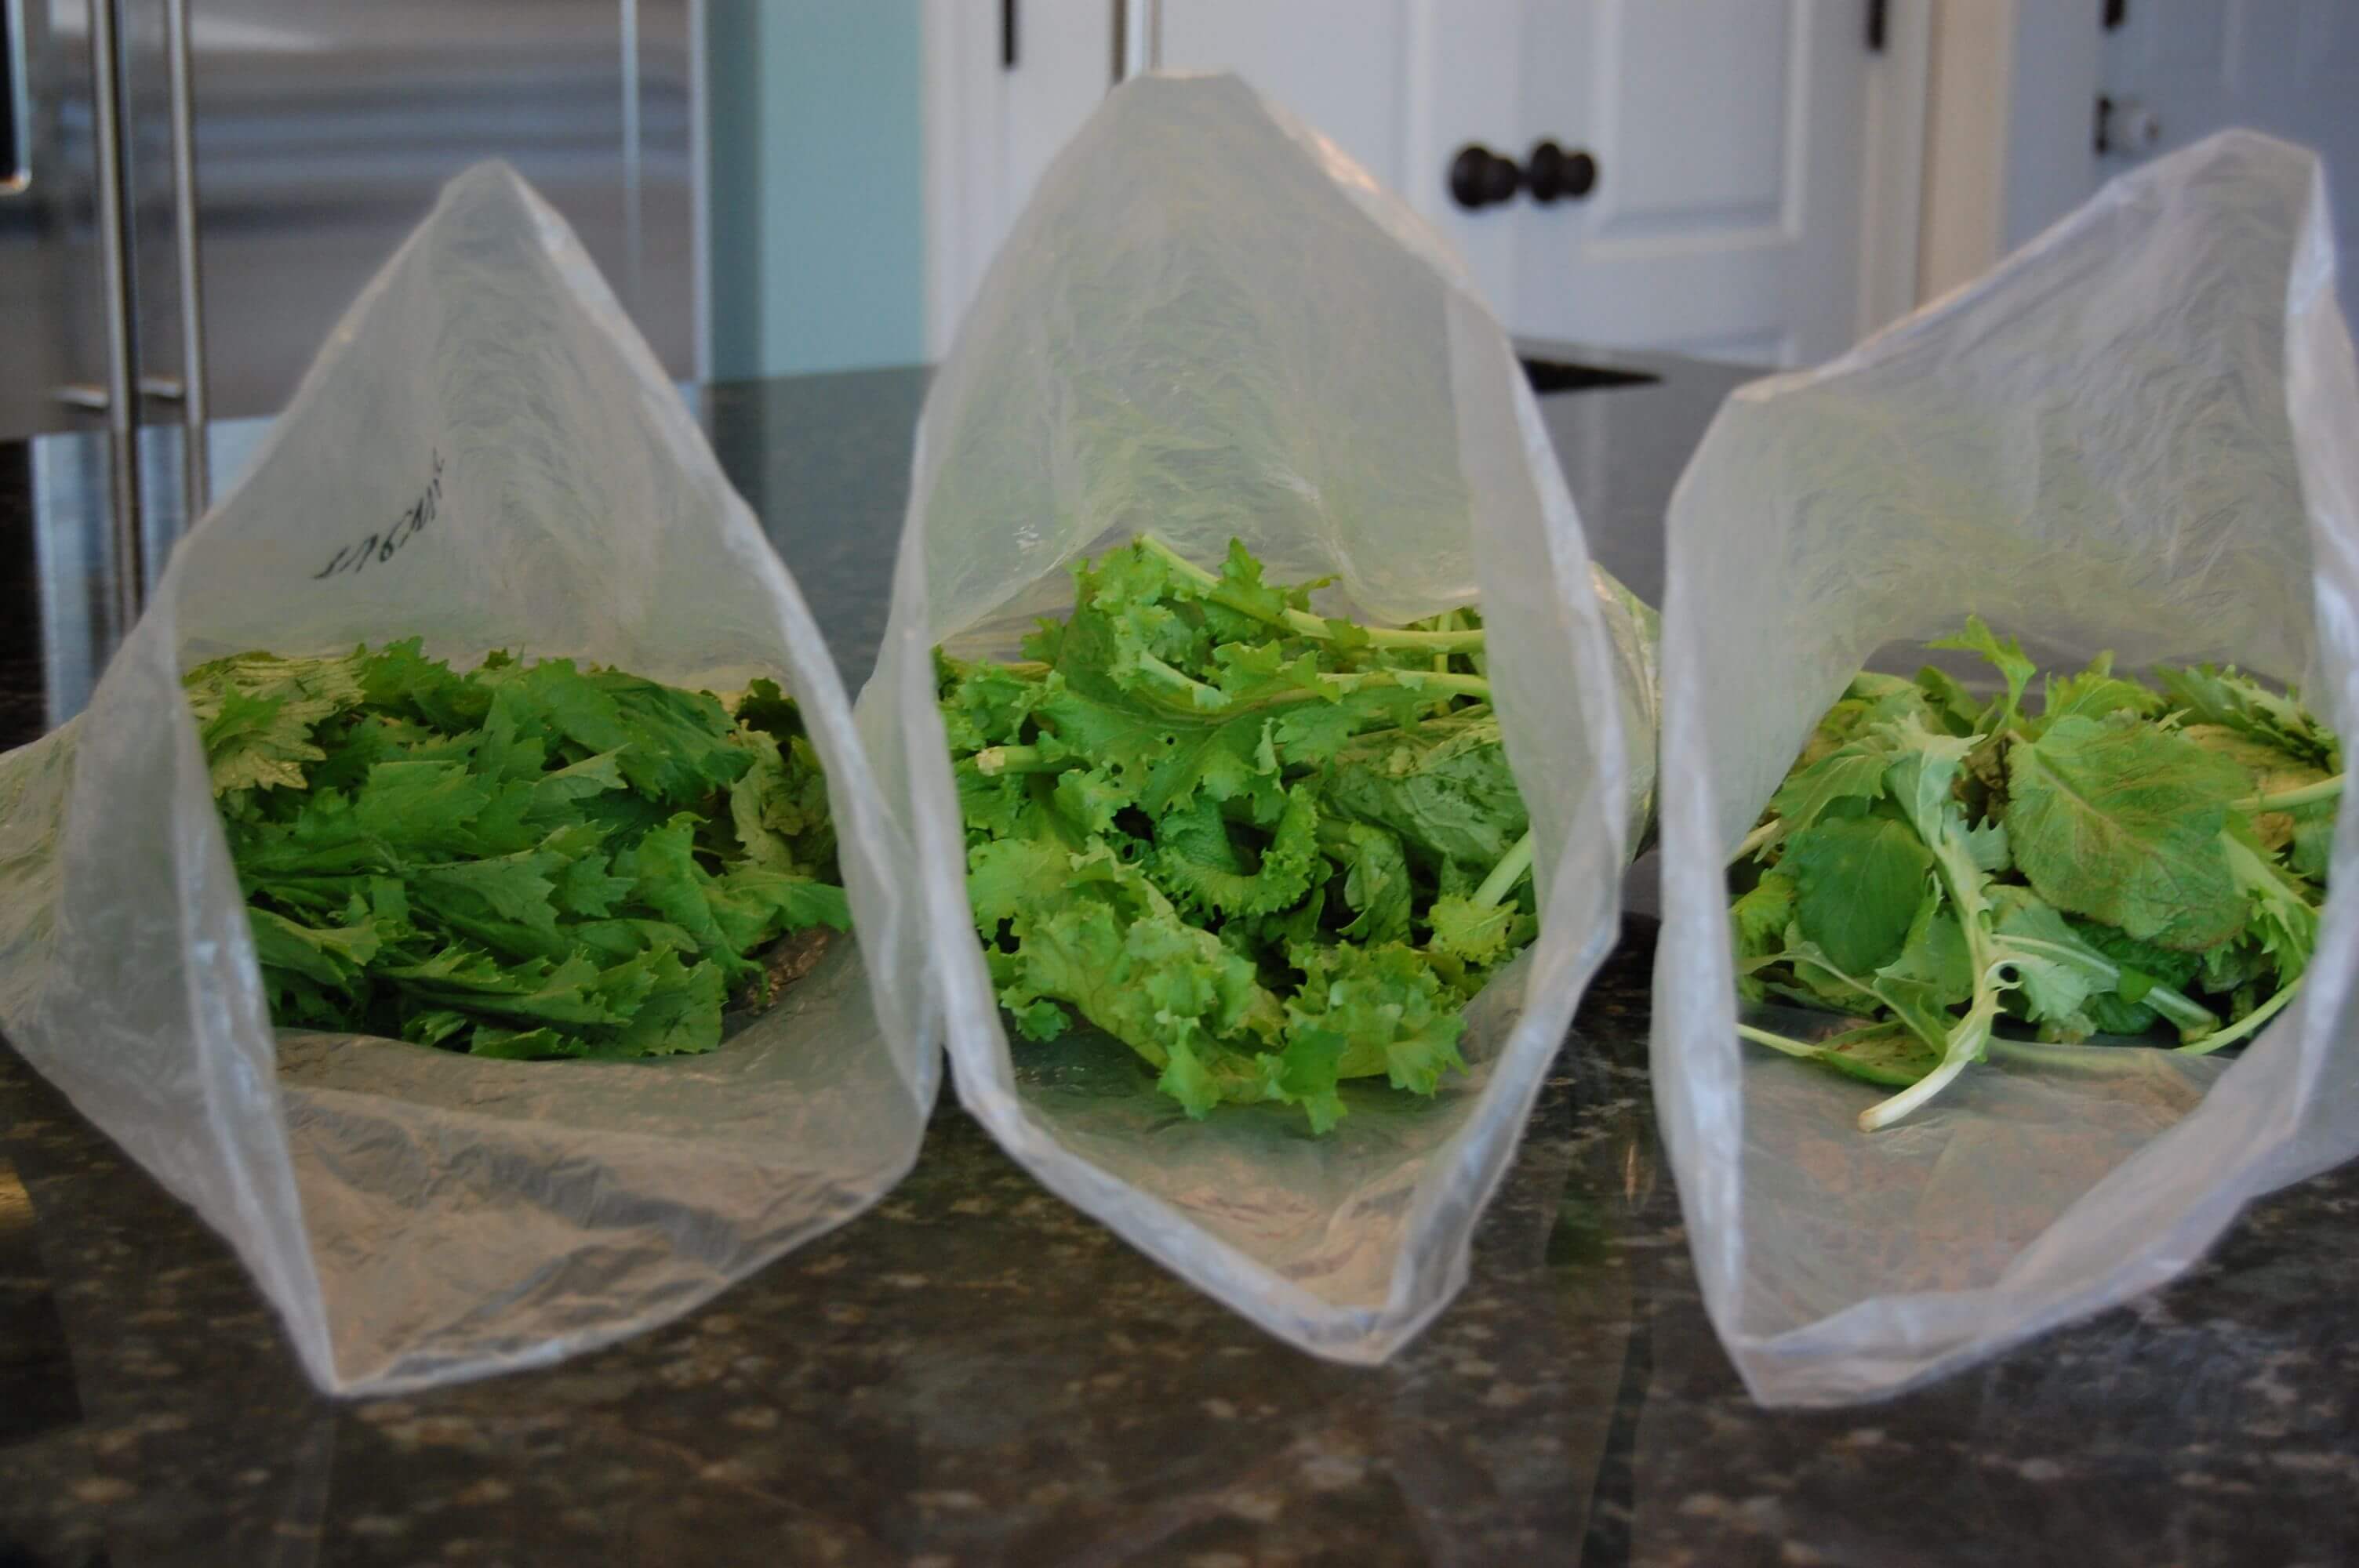 Three bags of different varieties of lettuce.